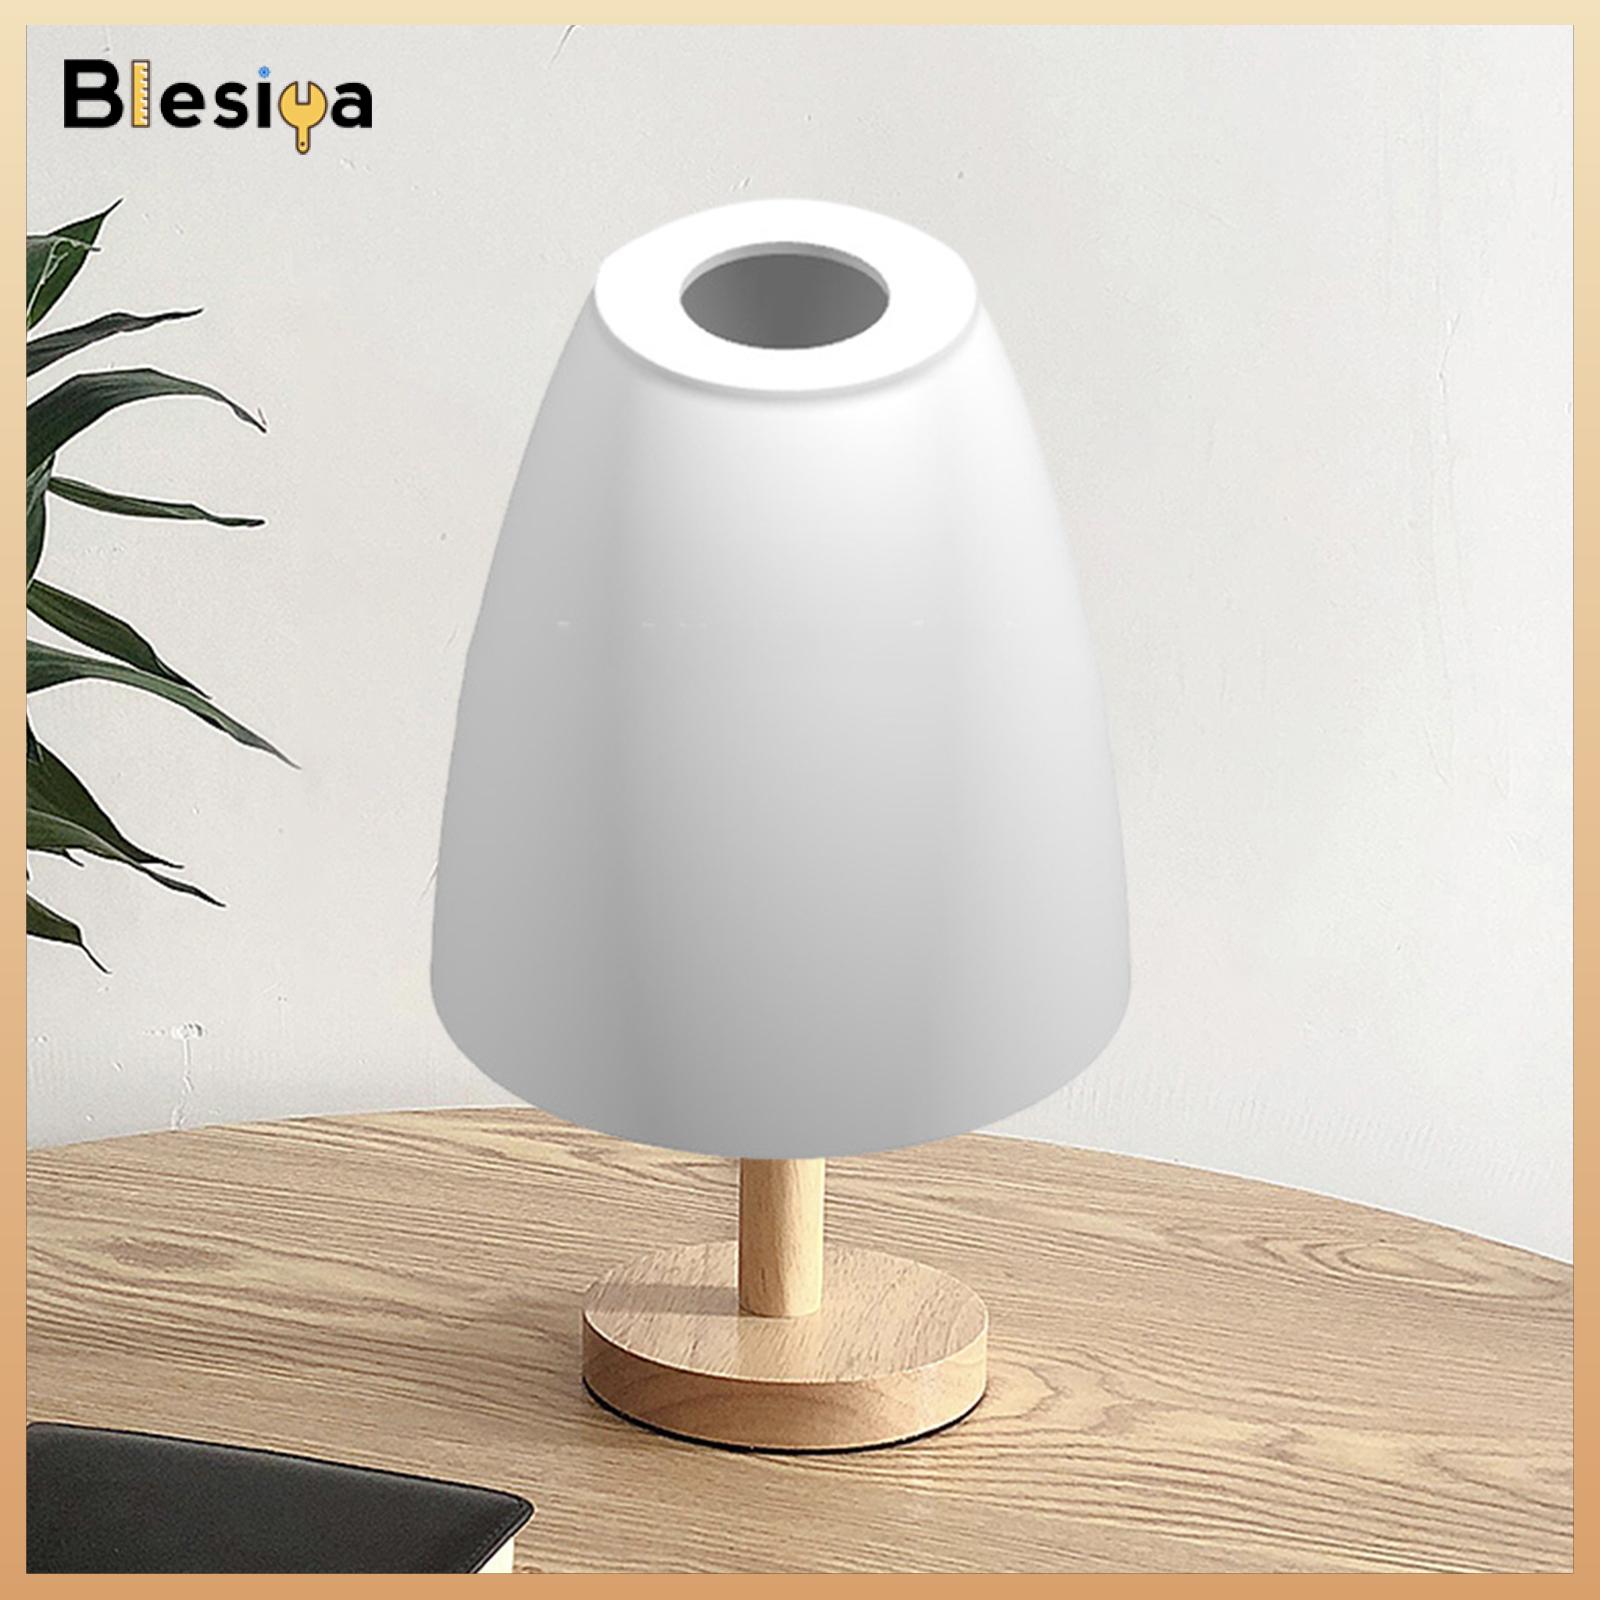 Blesiya Pendant Lampshade Decorative Practical Chandelier Cover for Dorm